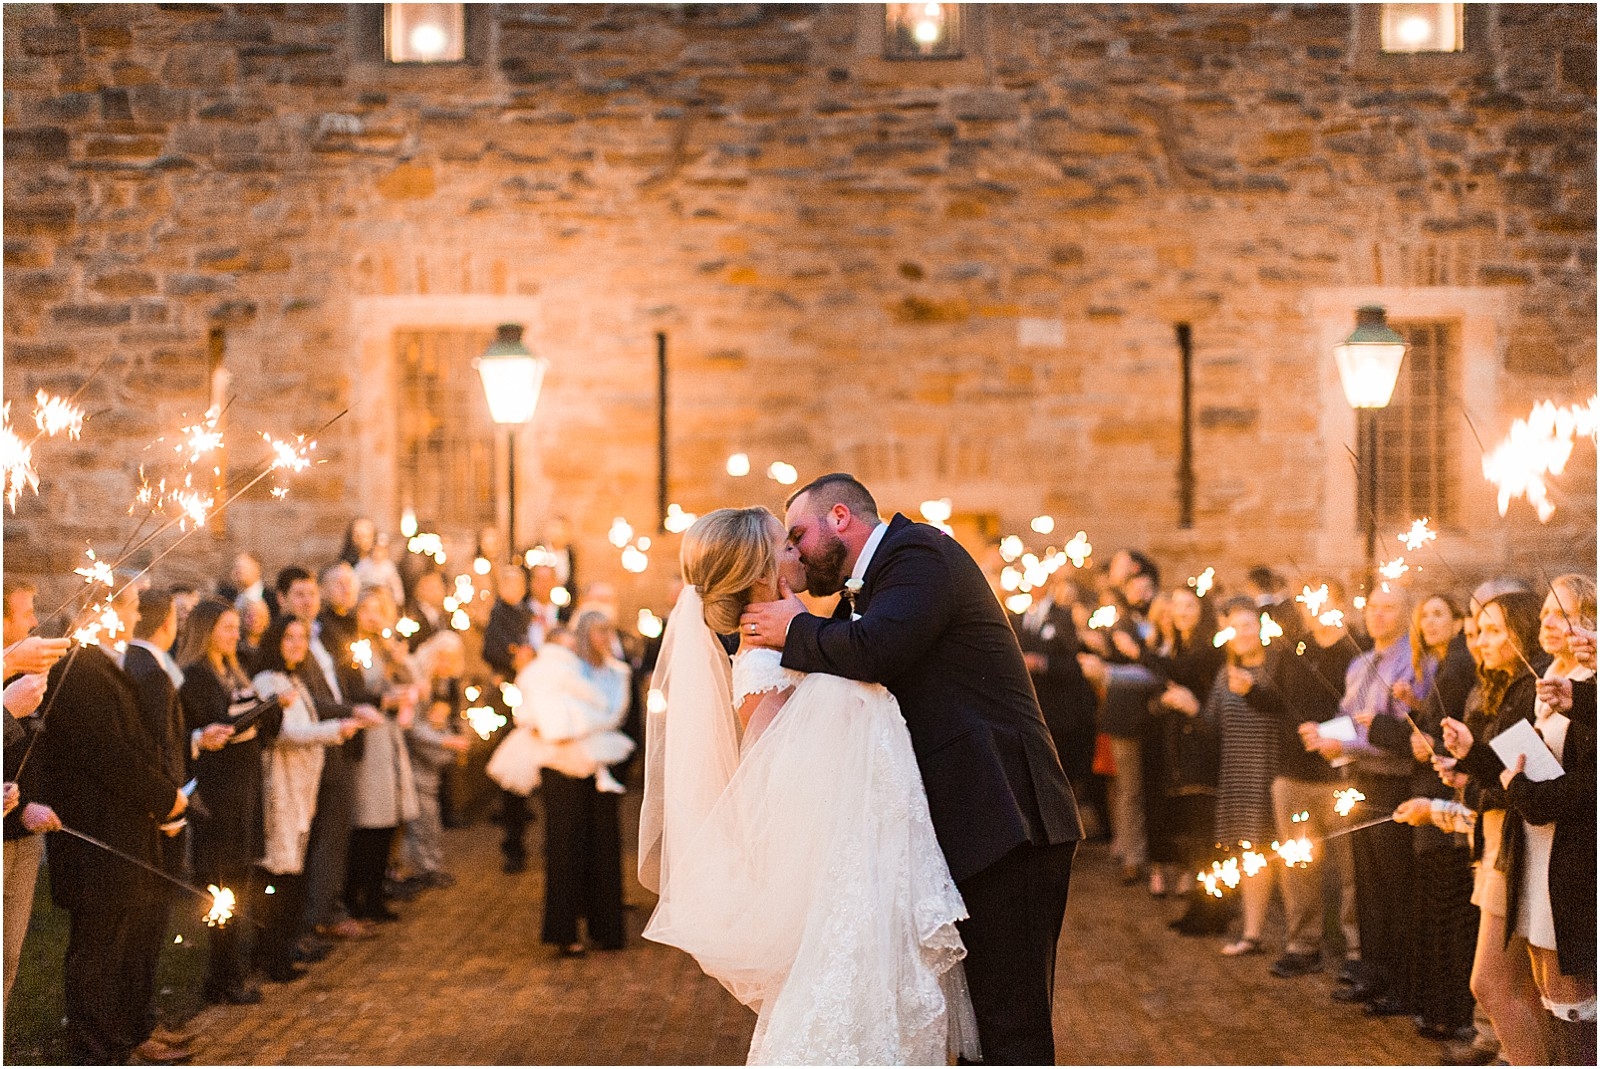 A Classic Winter Wedding in New Harmony | Rachel and Ryan | Bret and Brandie Photography 0125.jpg